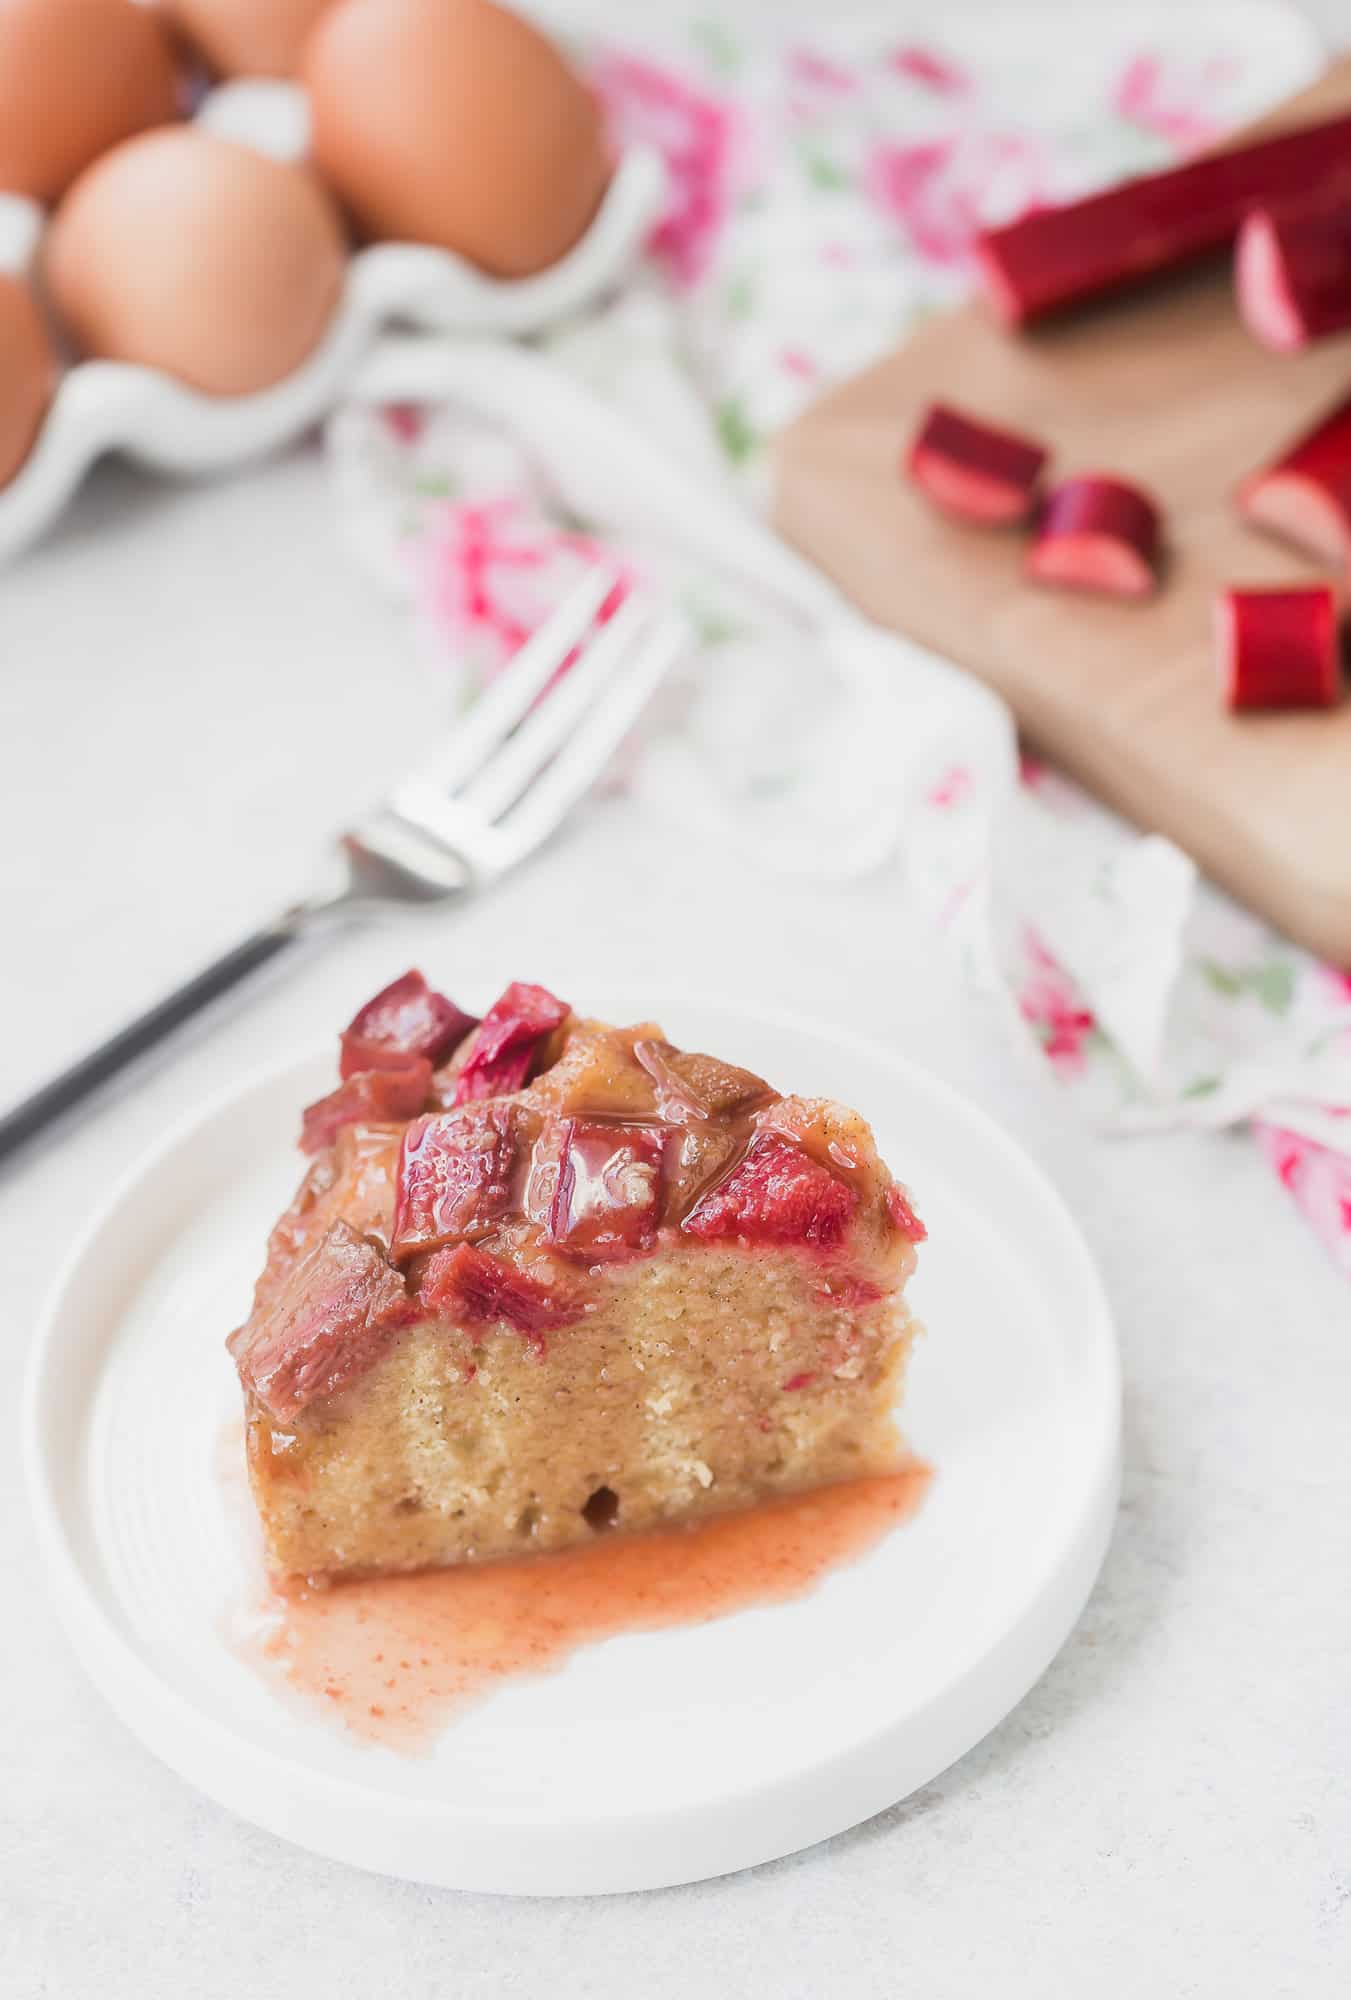 Slice of rhubarb instant pot cake, with rhubarb in the background.